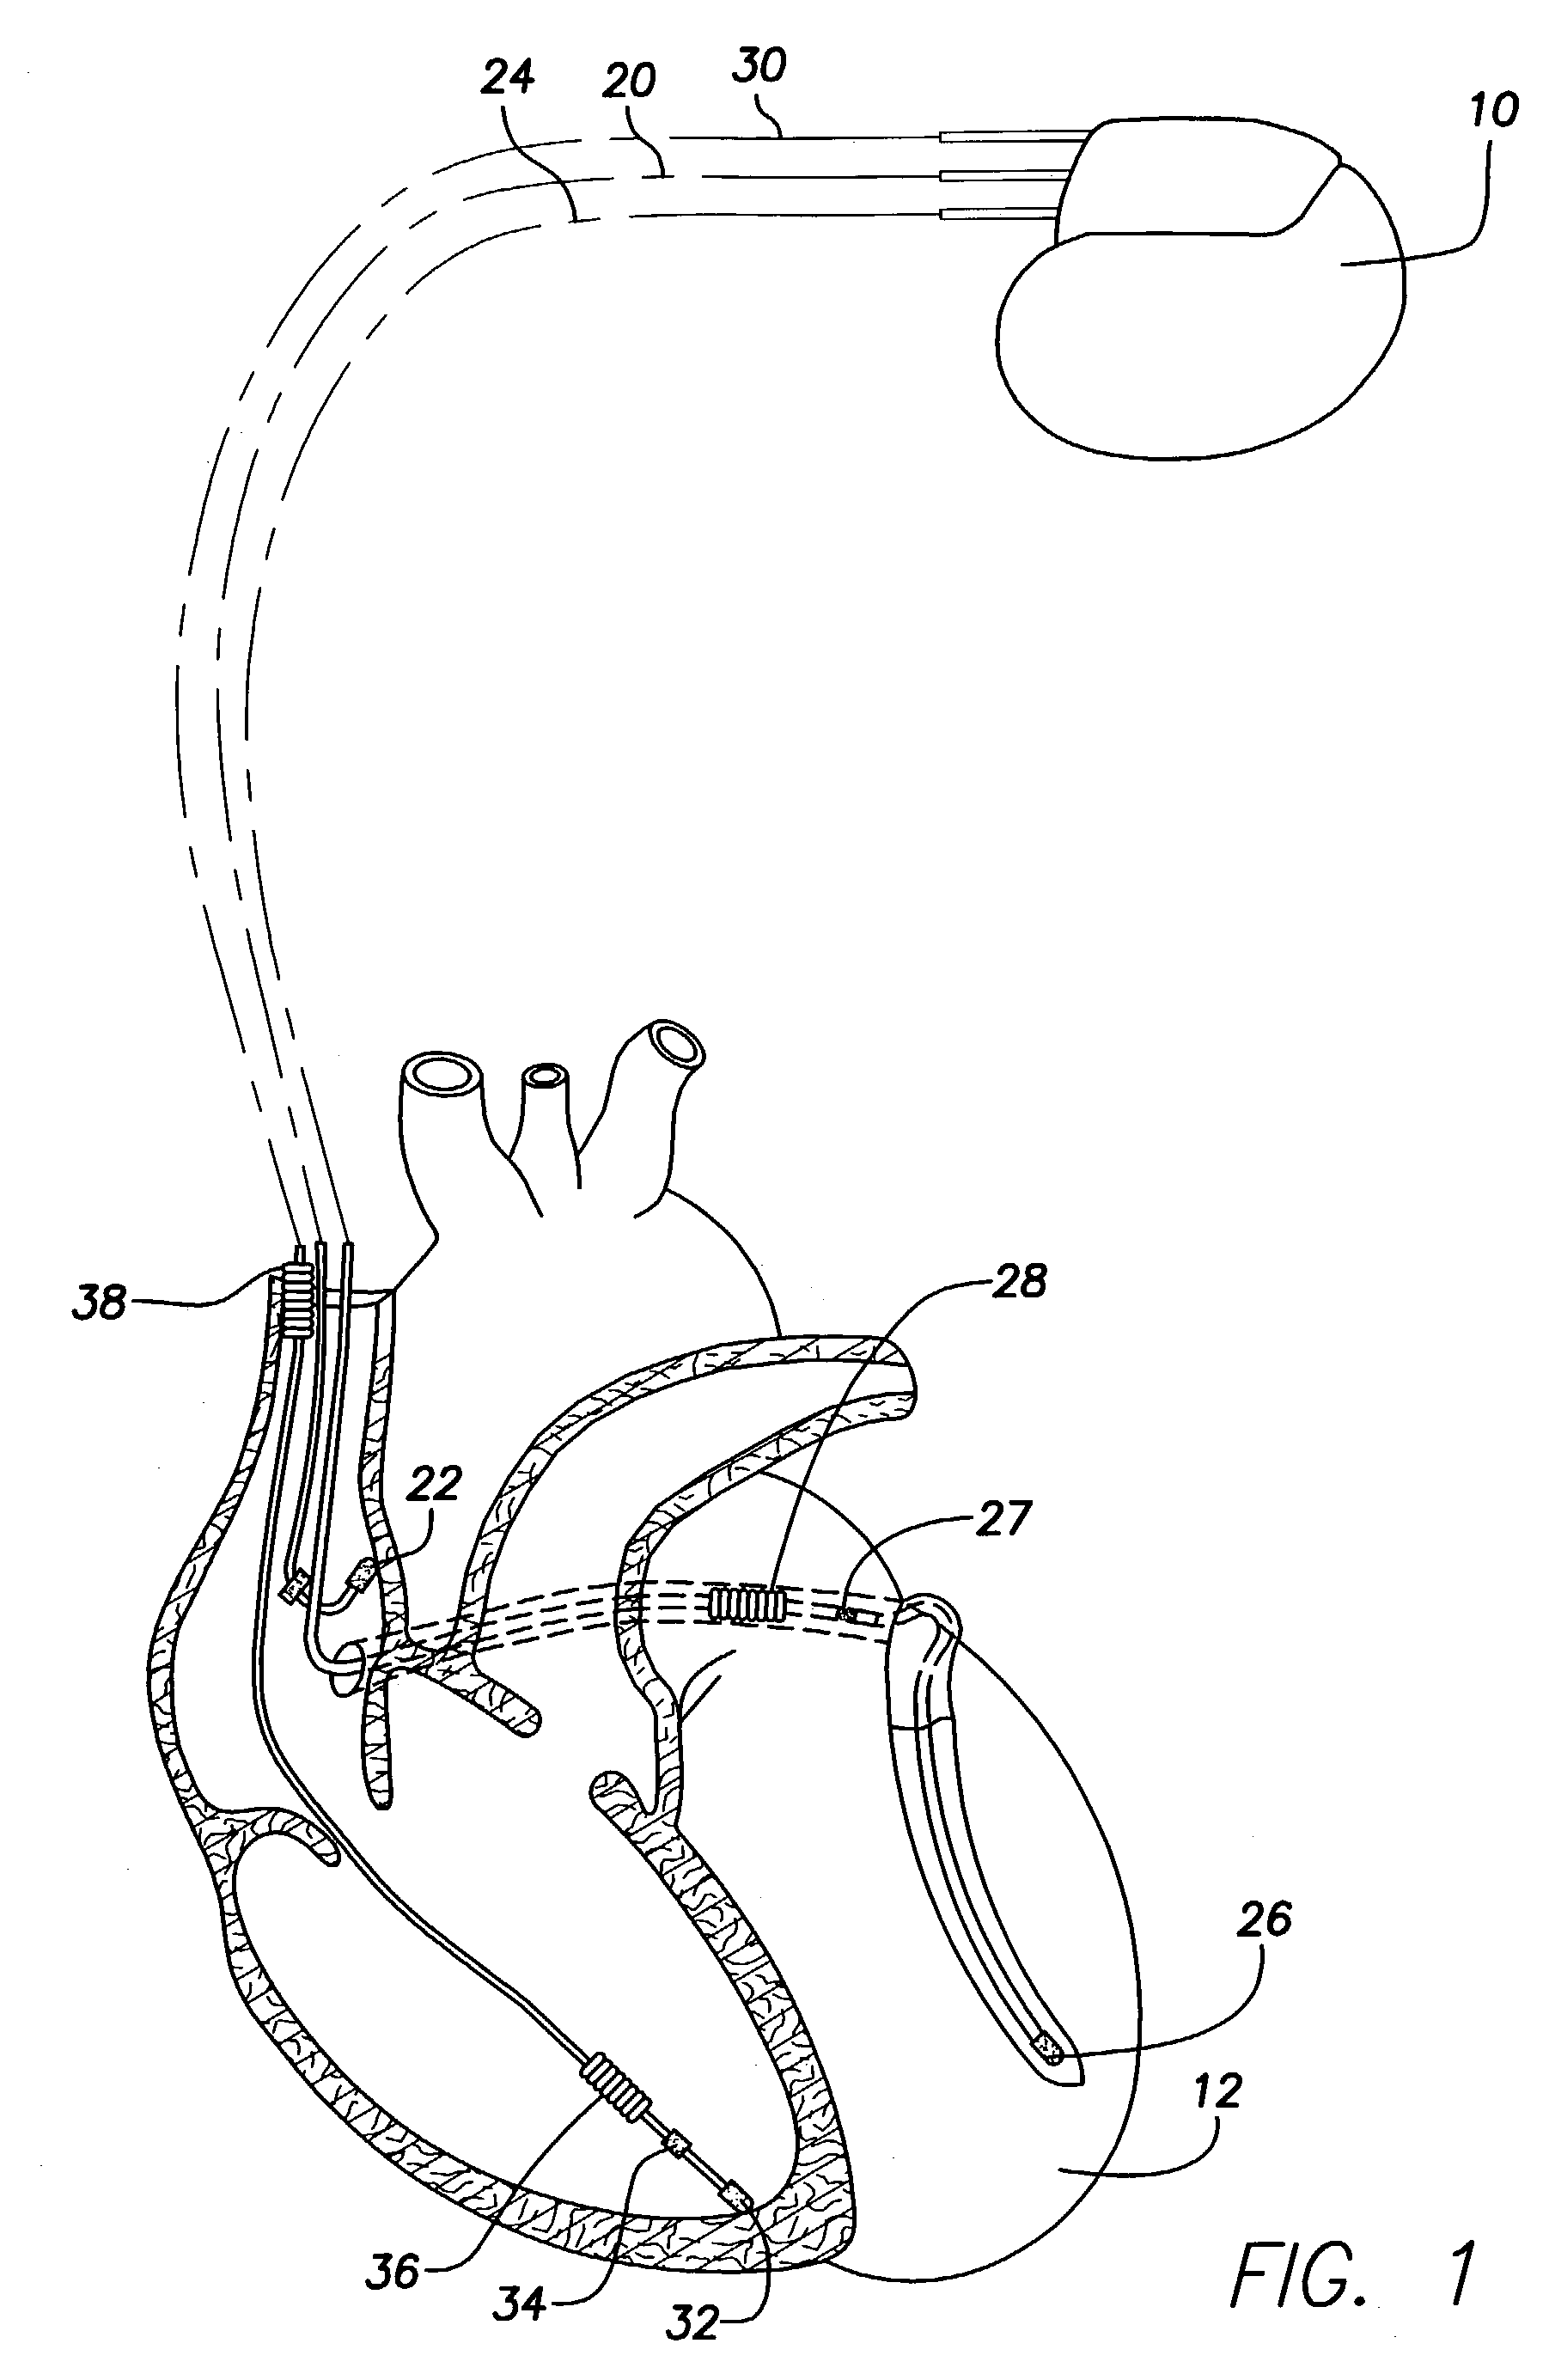 System and method for monitoring cardiac function via cardiac sounds using an implantable cardiac stimulation device